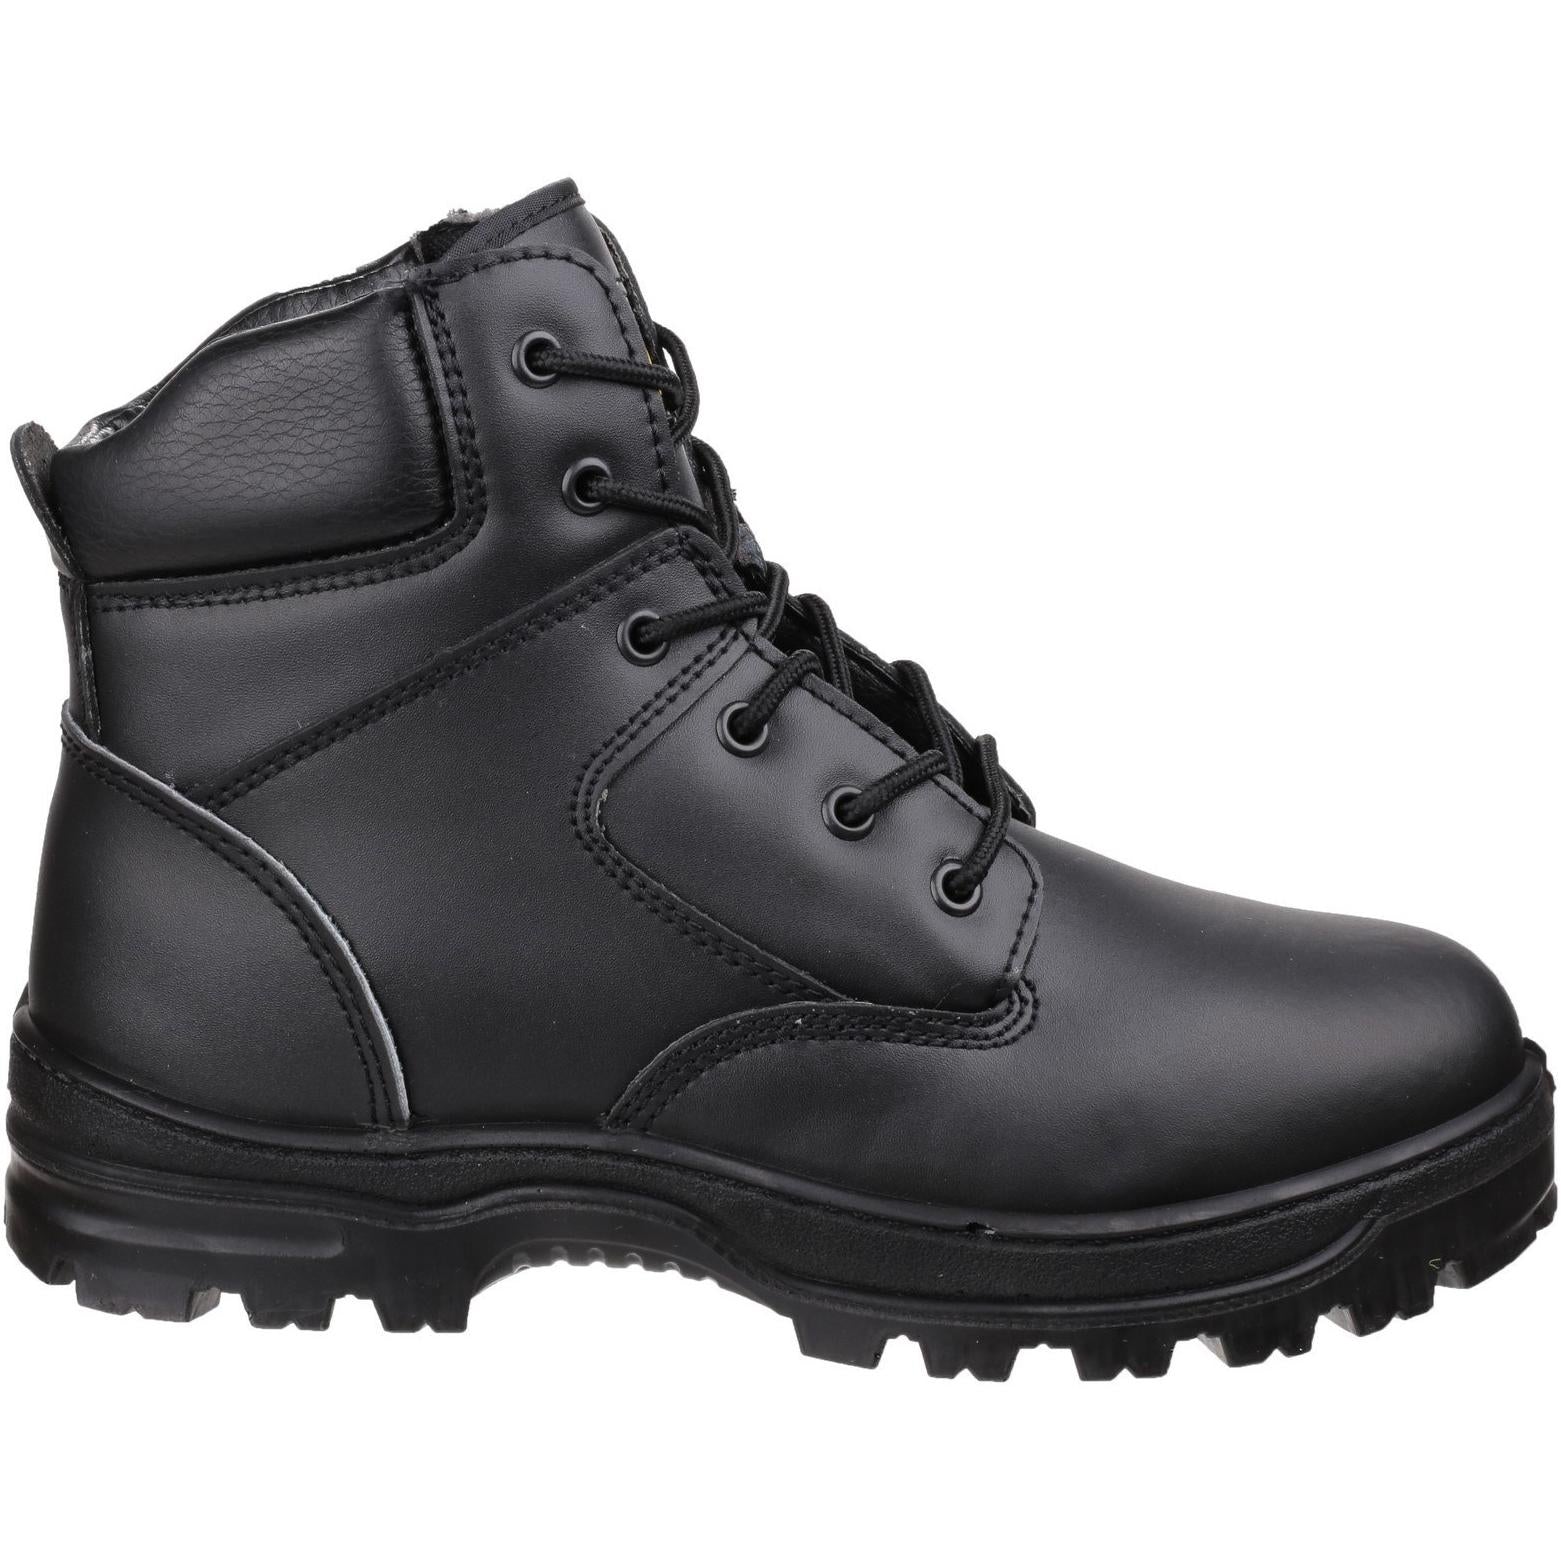 Amblers Safety FS84 Antistatic Lace up Safety Boot